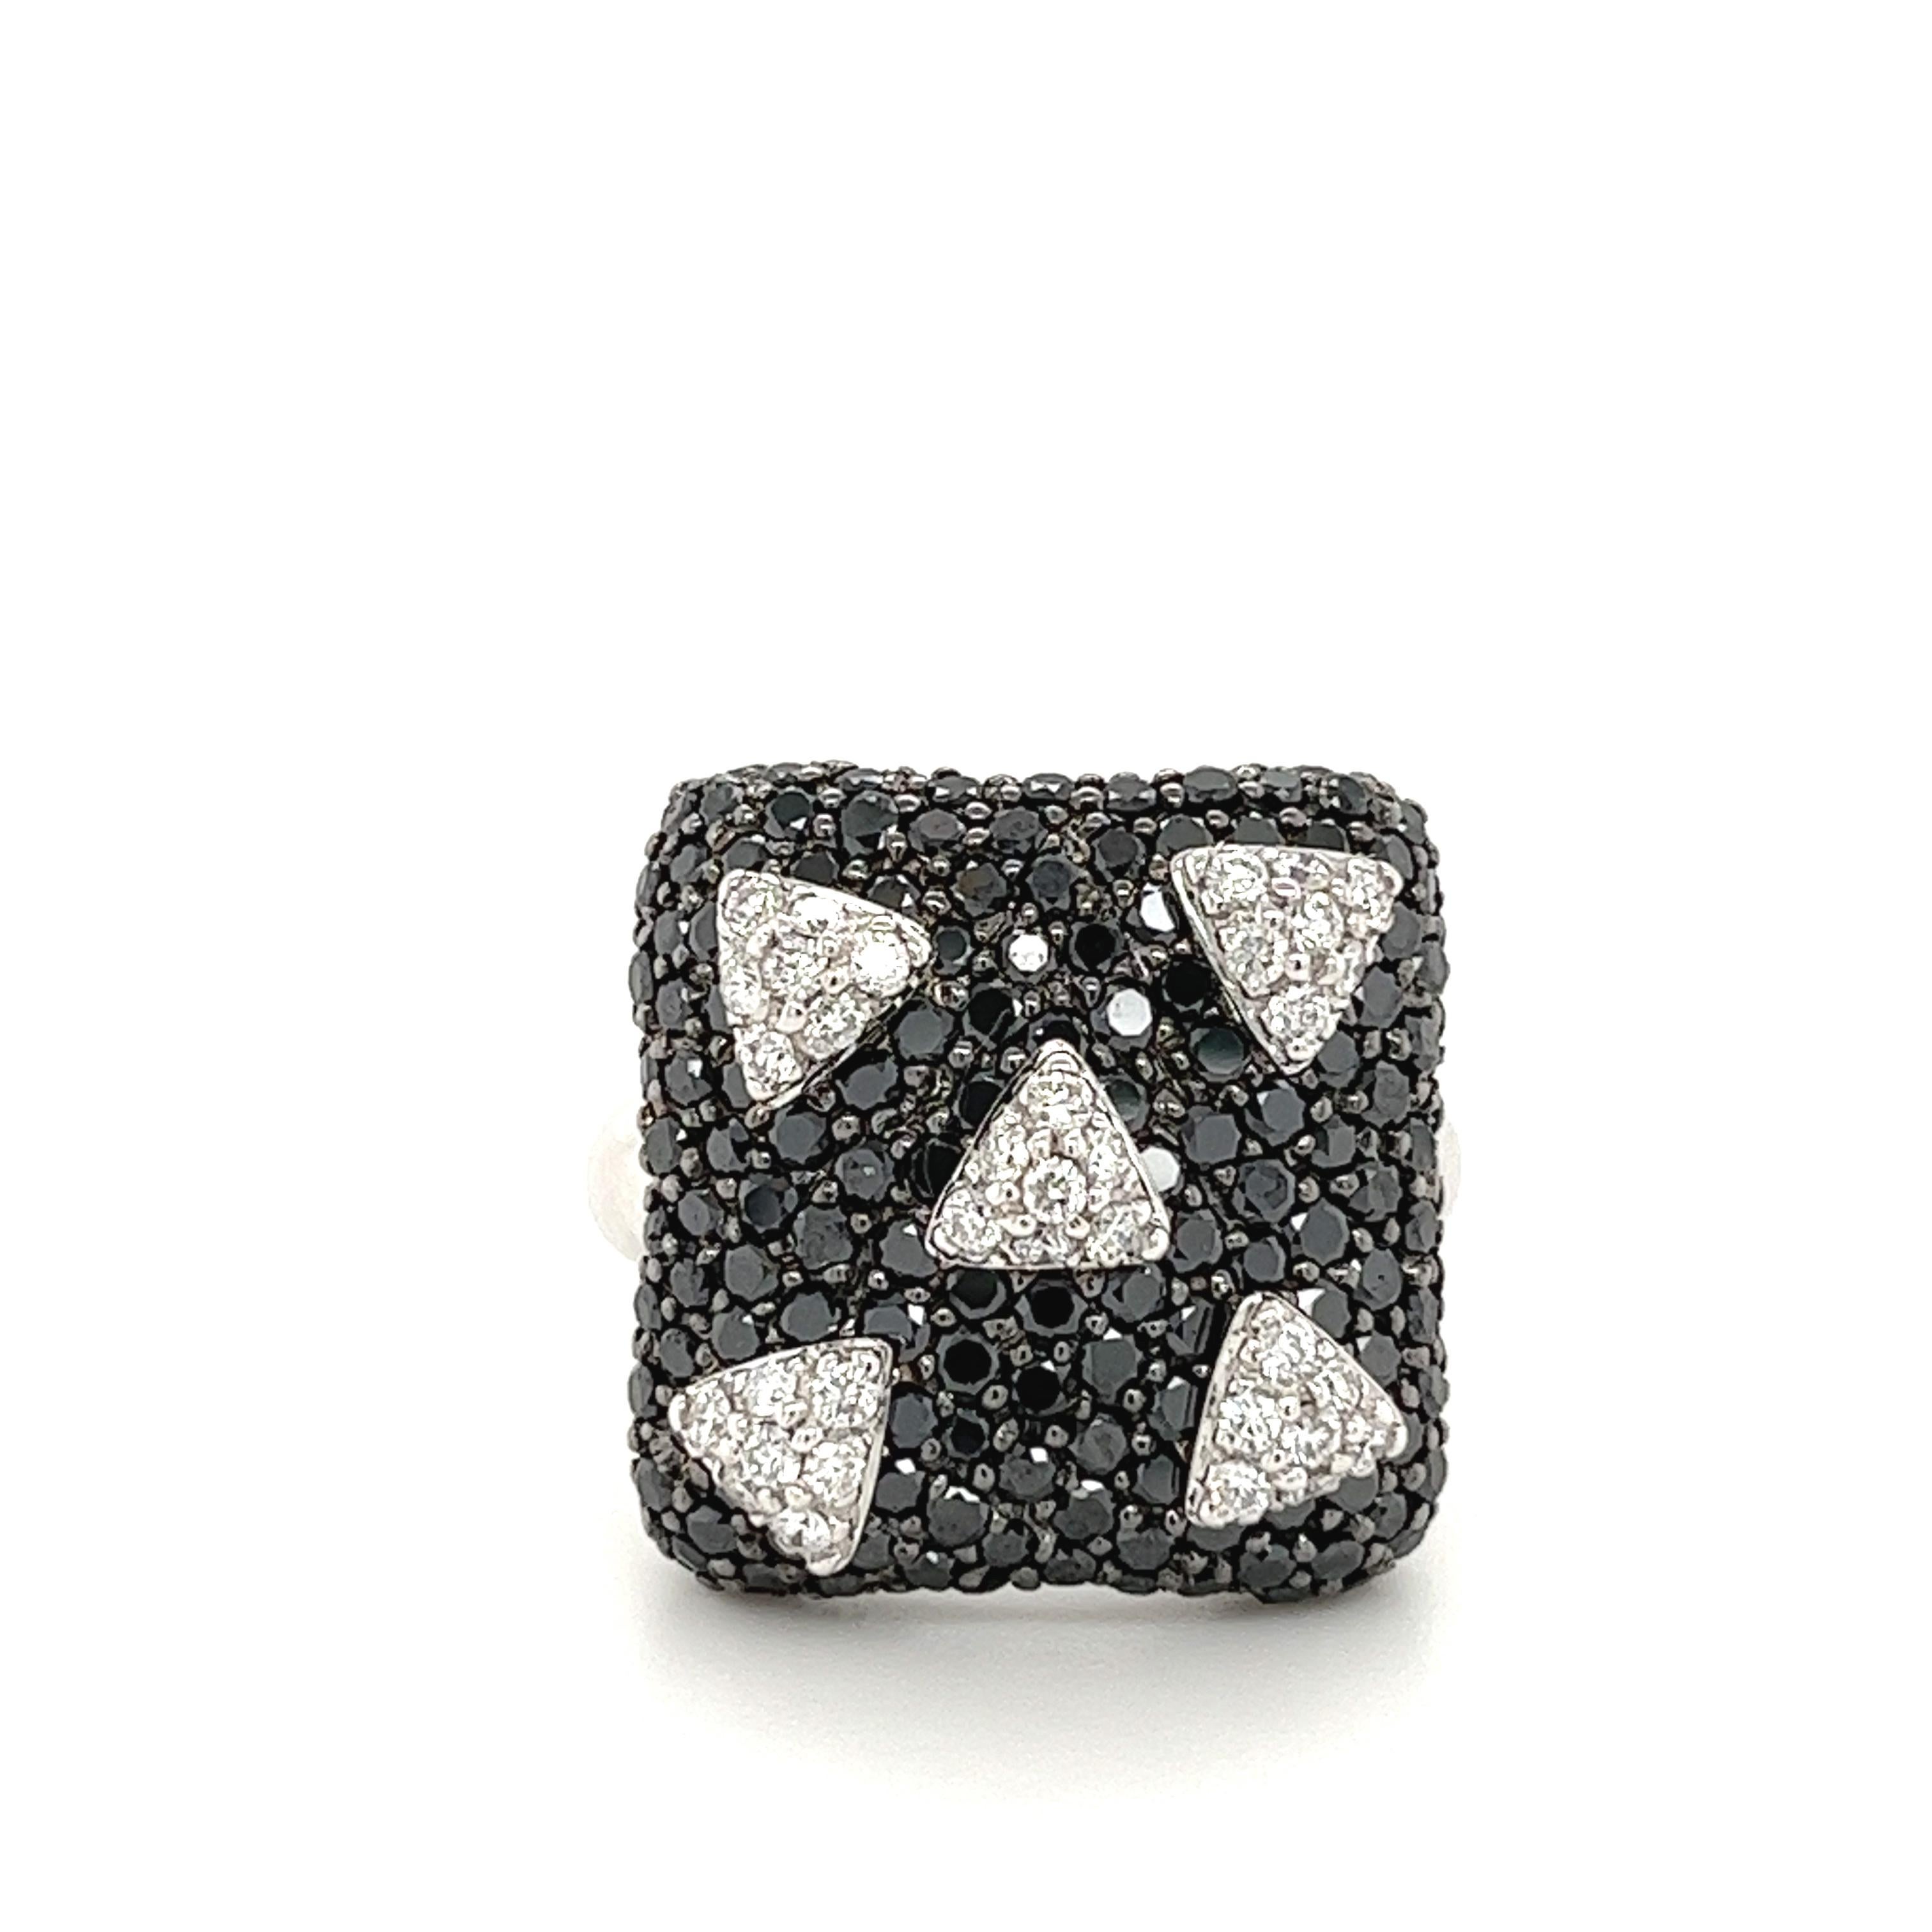 Round Cut Black and White Diamond Cluster Ring in 18k White Gold with Starlit Night Theme For Sale